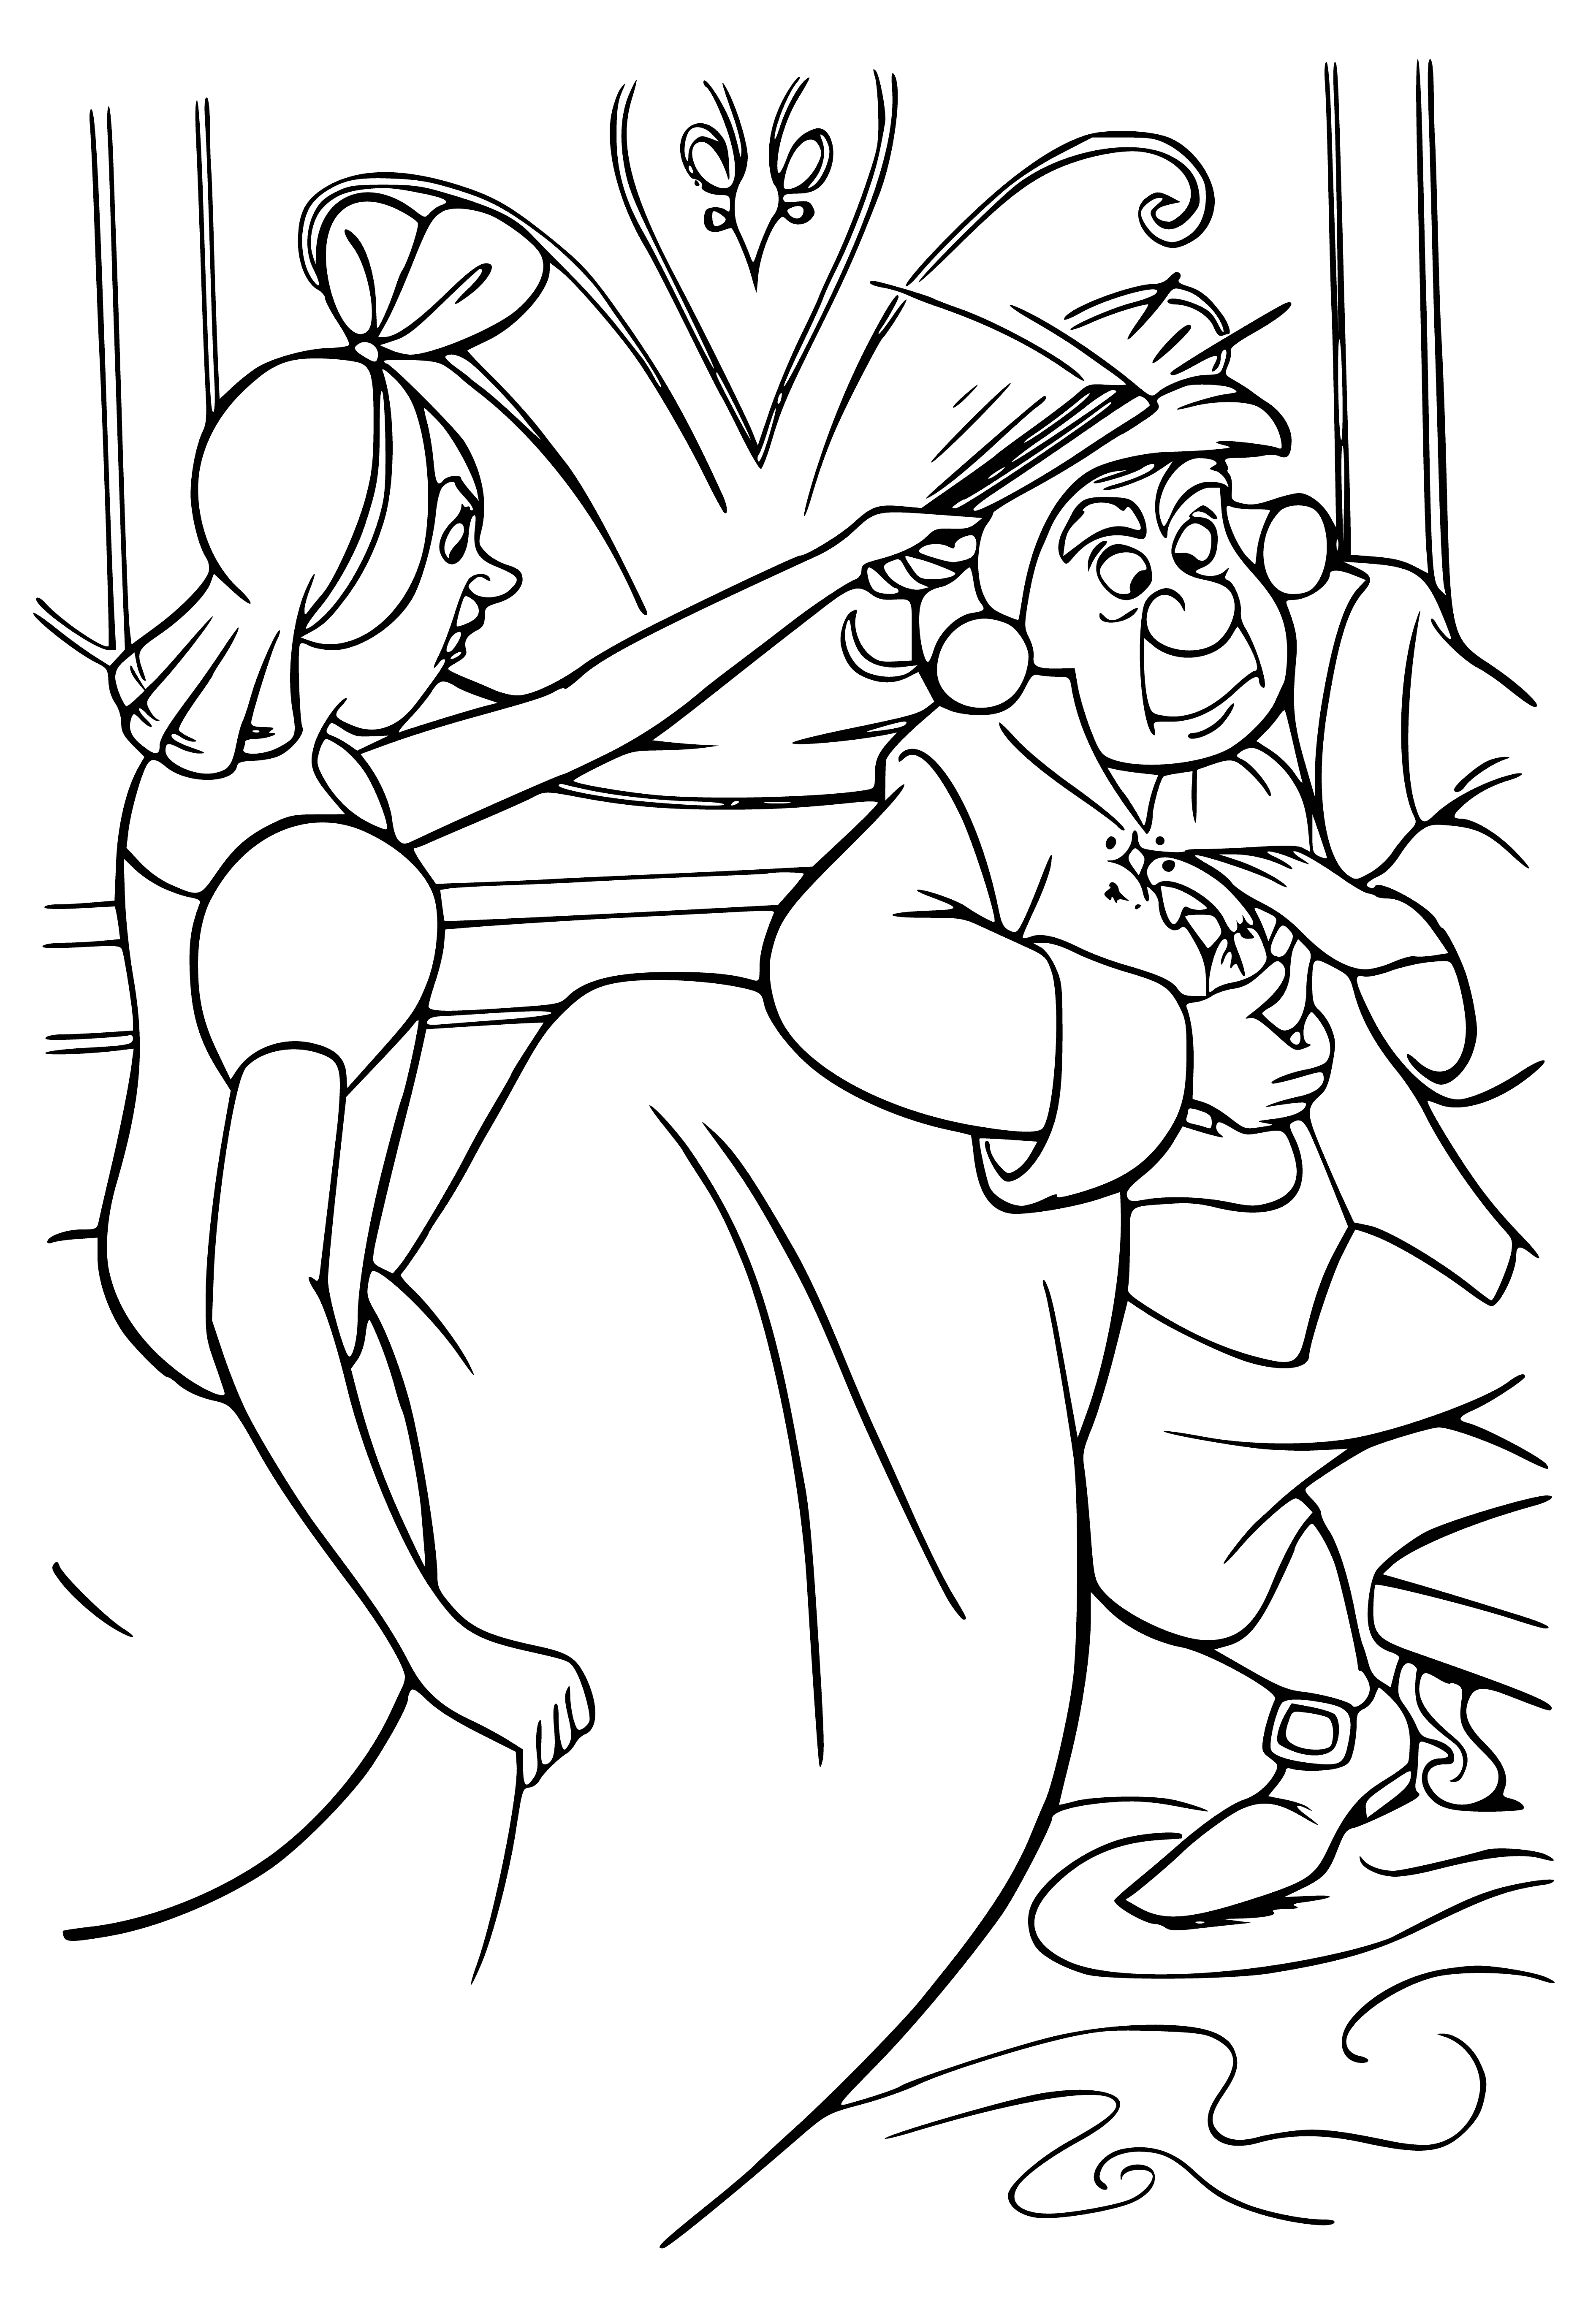 The shoe is too small for it coloring page